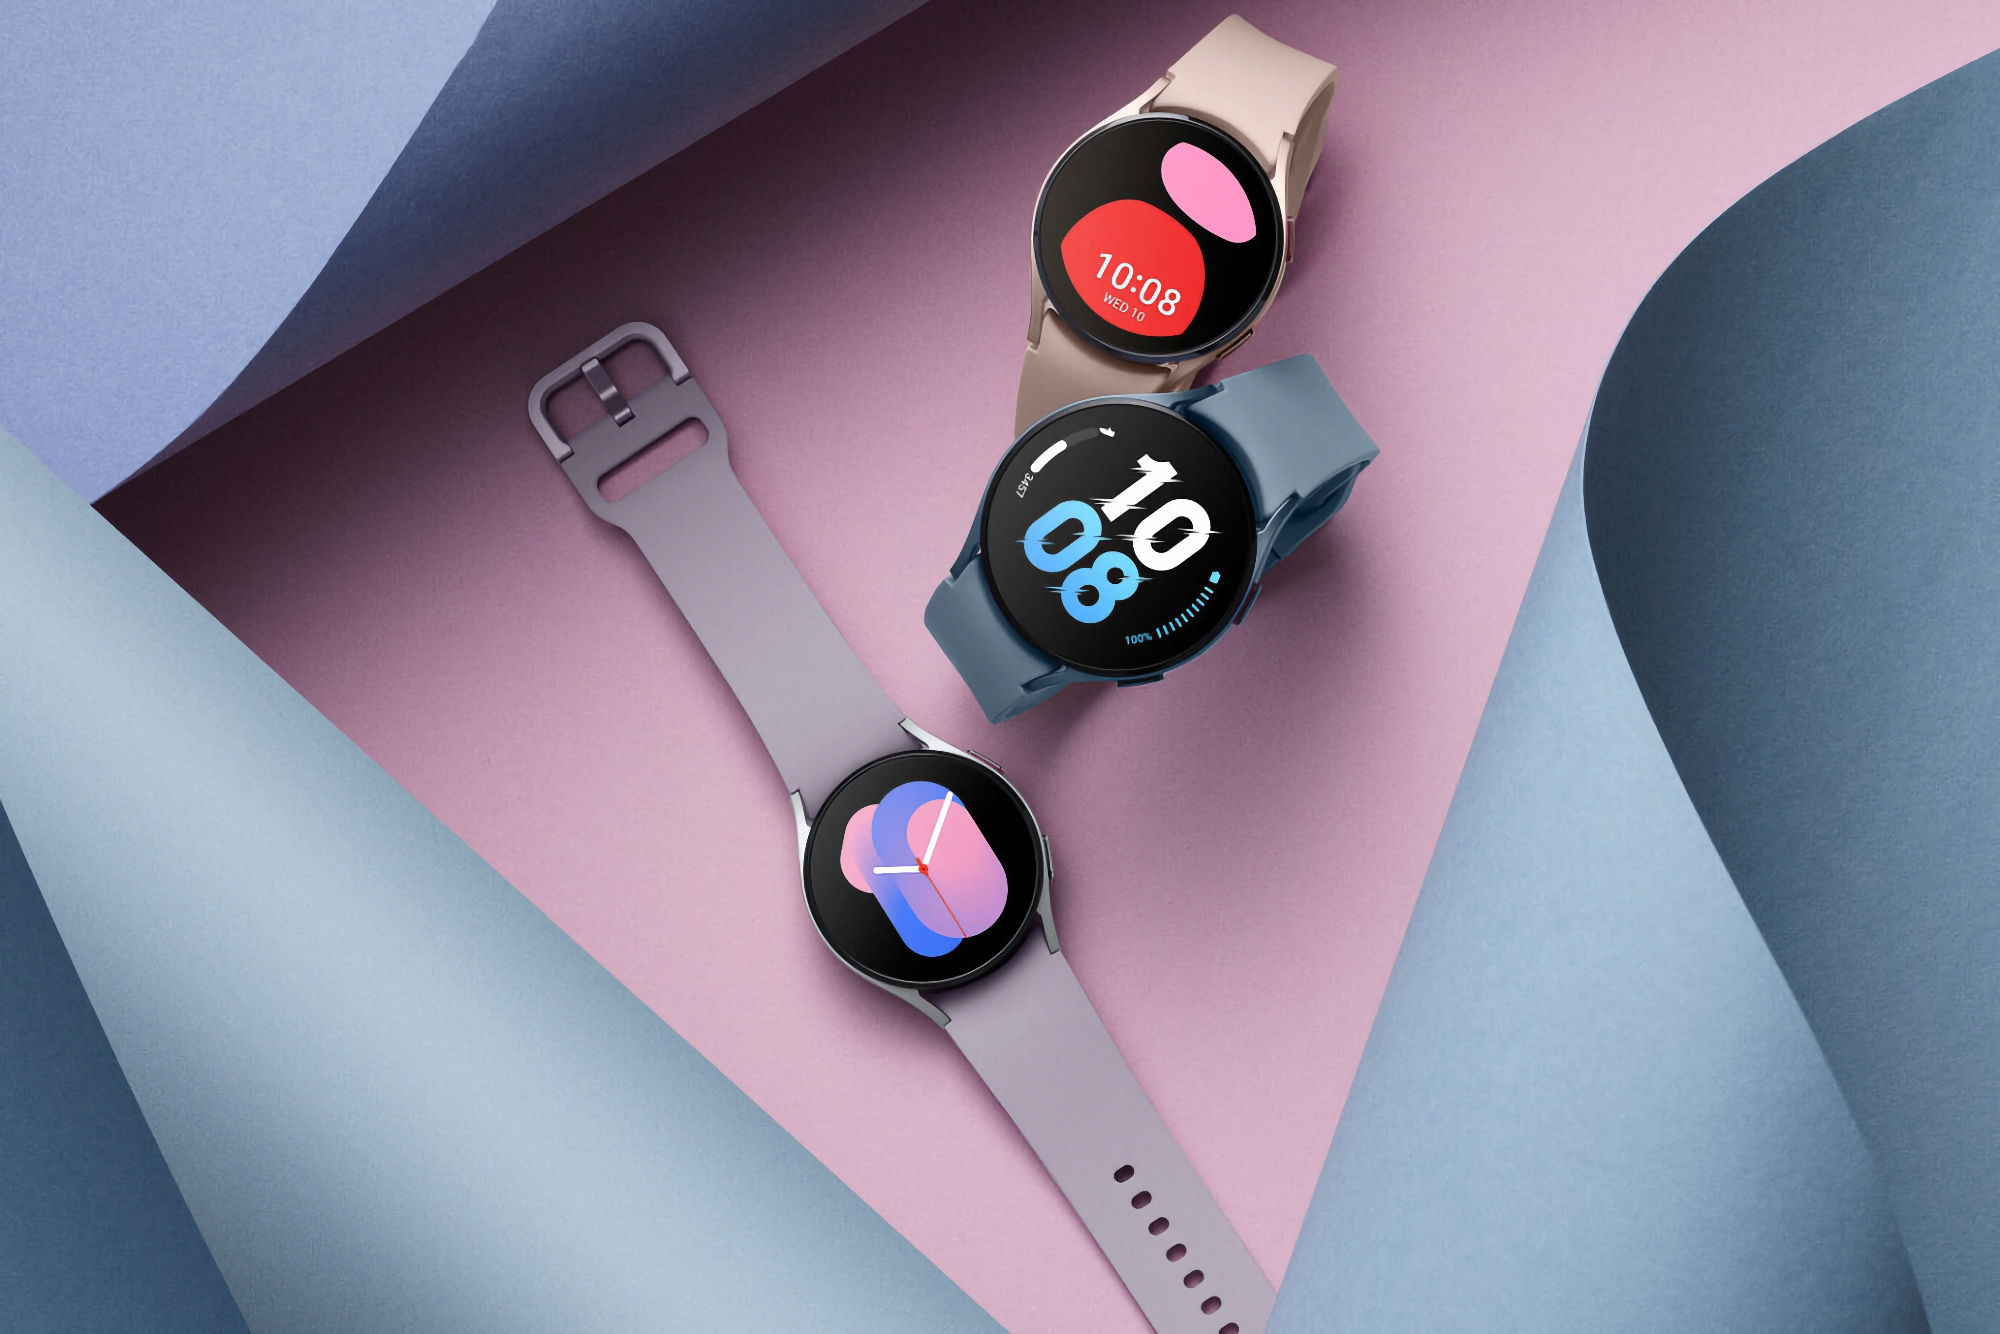 Galaxy Watch 5 and Galaxy Watch 5 Pro users can now check smartwatch battery status on their smartphone